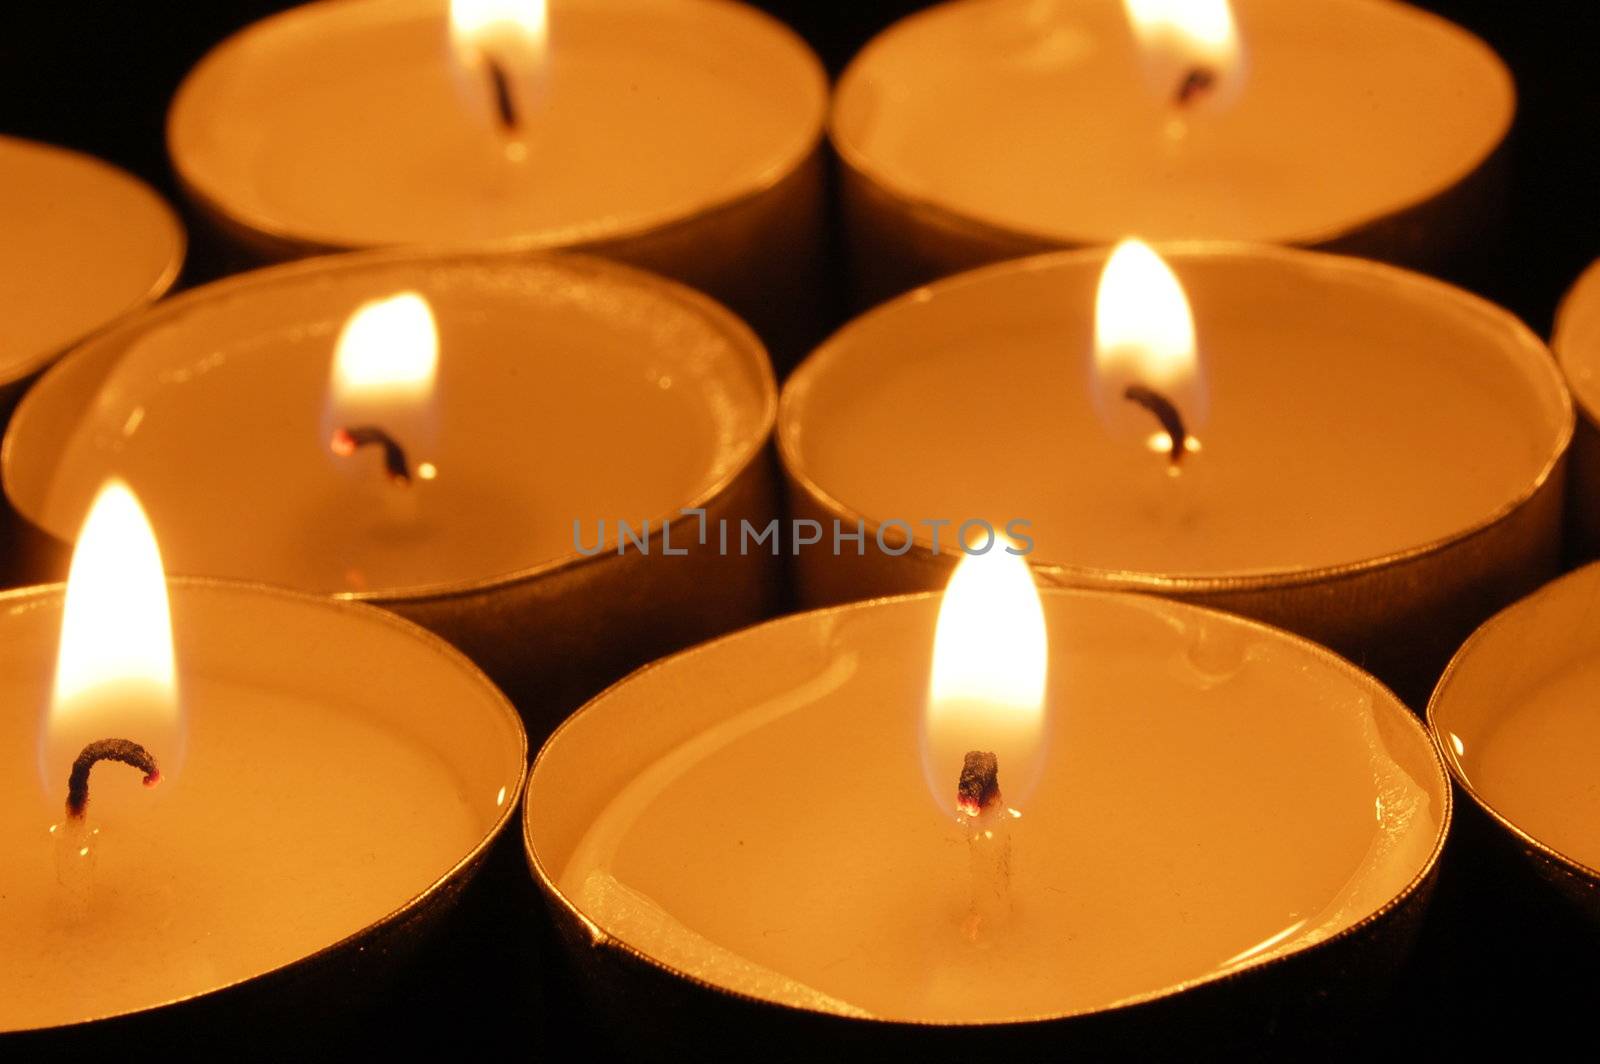 romantic hot candle light on black background